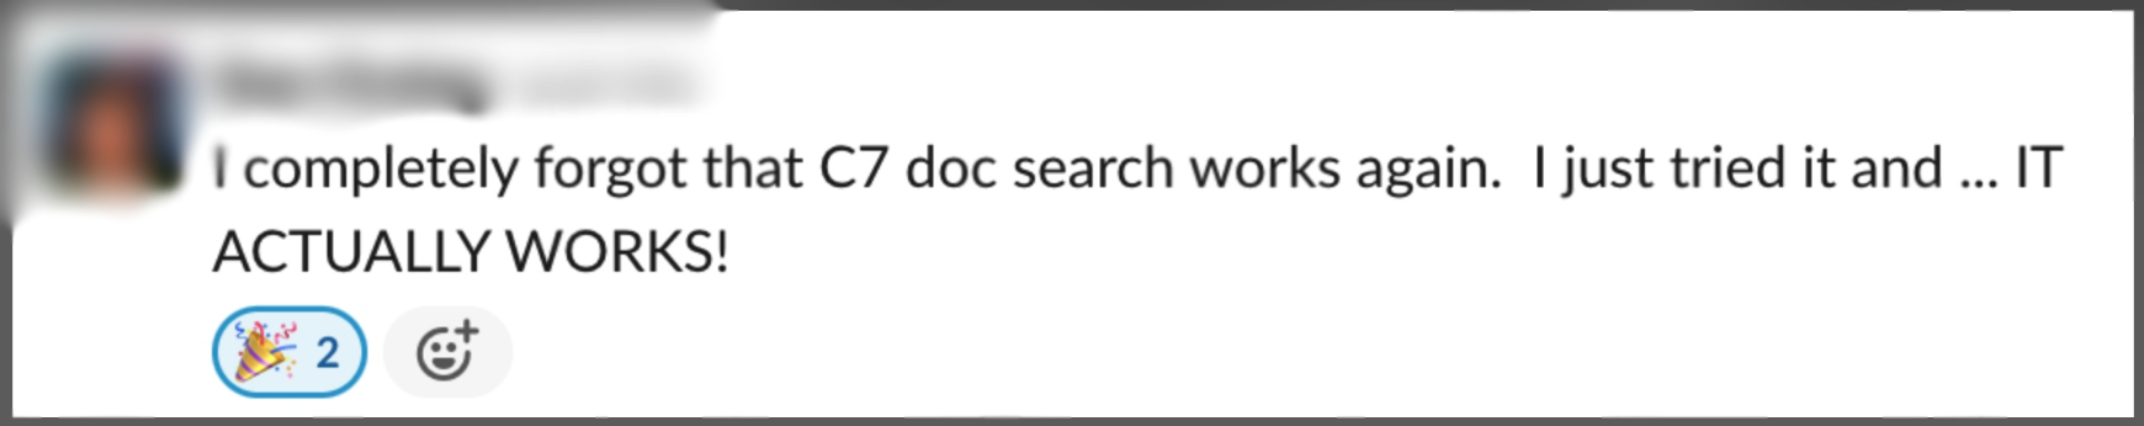 A message in Slack: "I completely forgot that C7 doc search works again. I just tried it and ... IT ACTUALLY WORKS!"